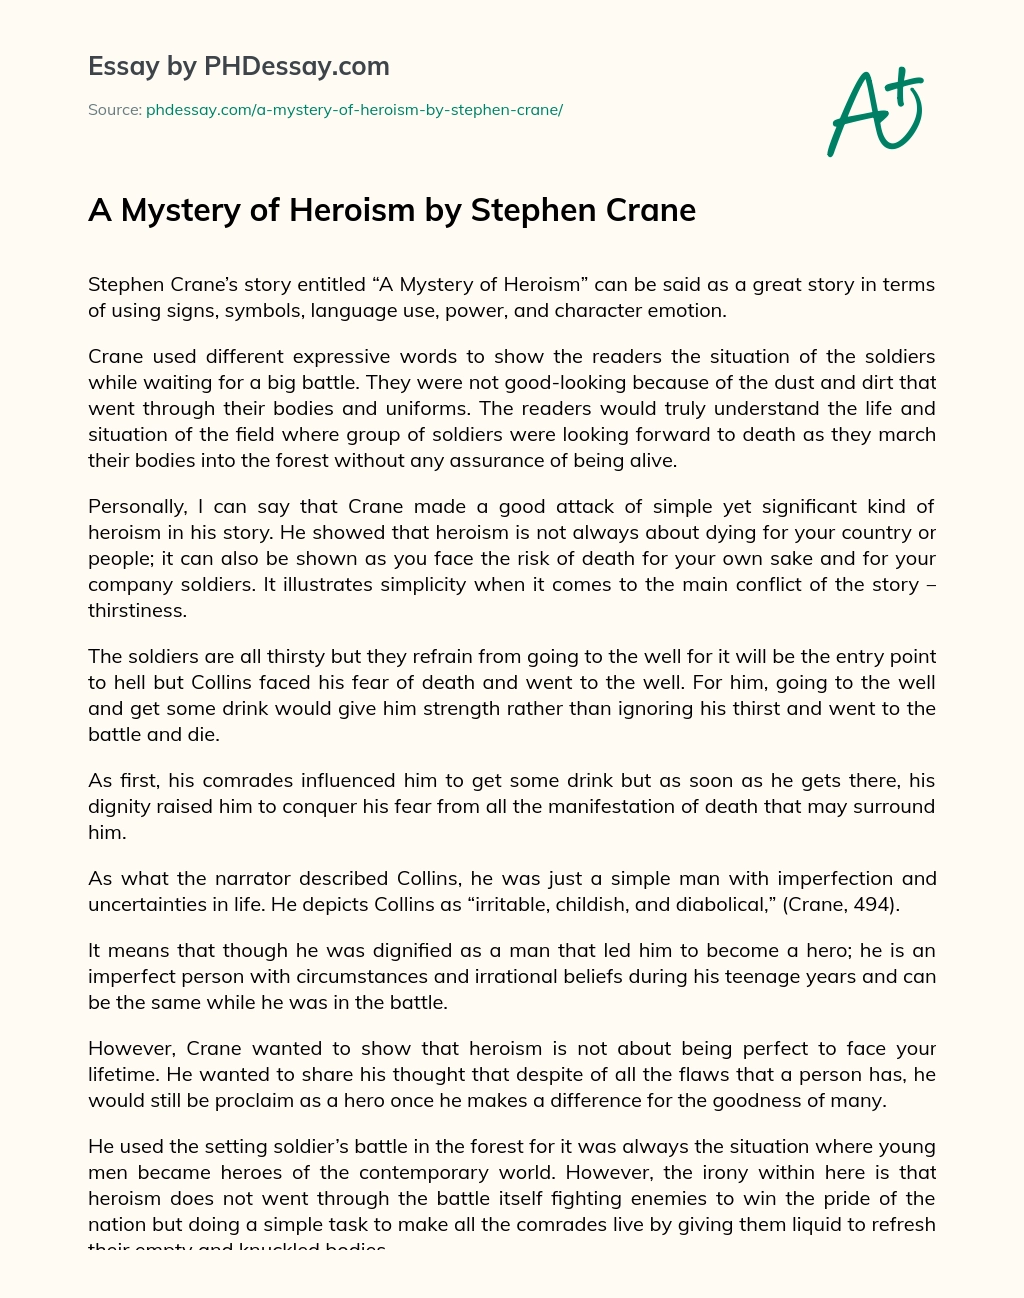 A Mystery of Heroism by Stephen Crane essay